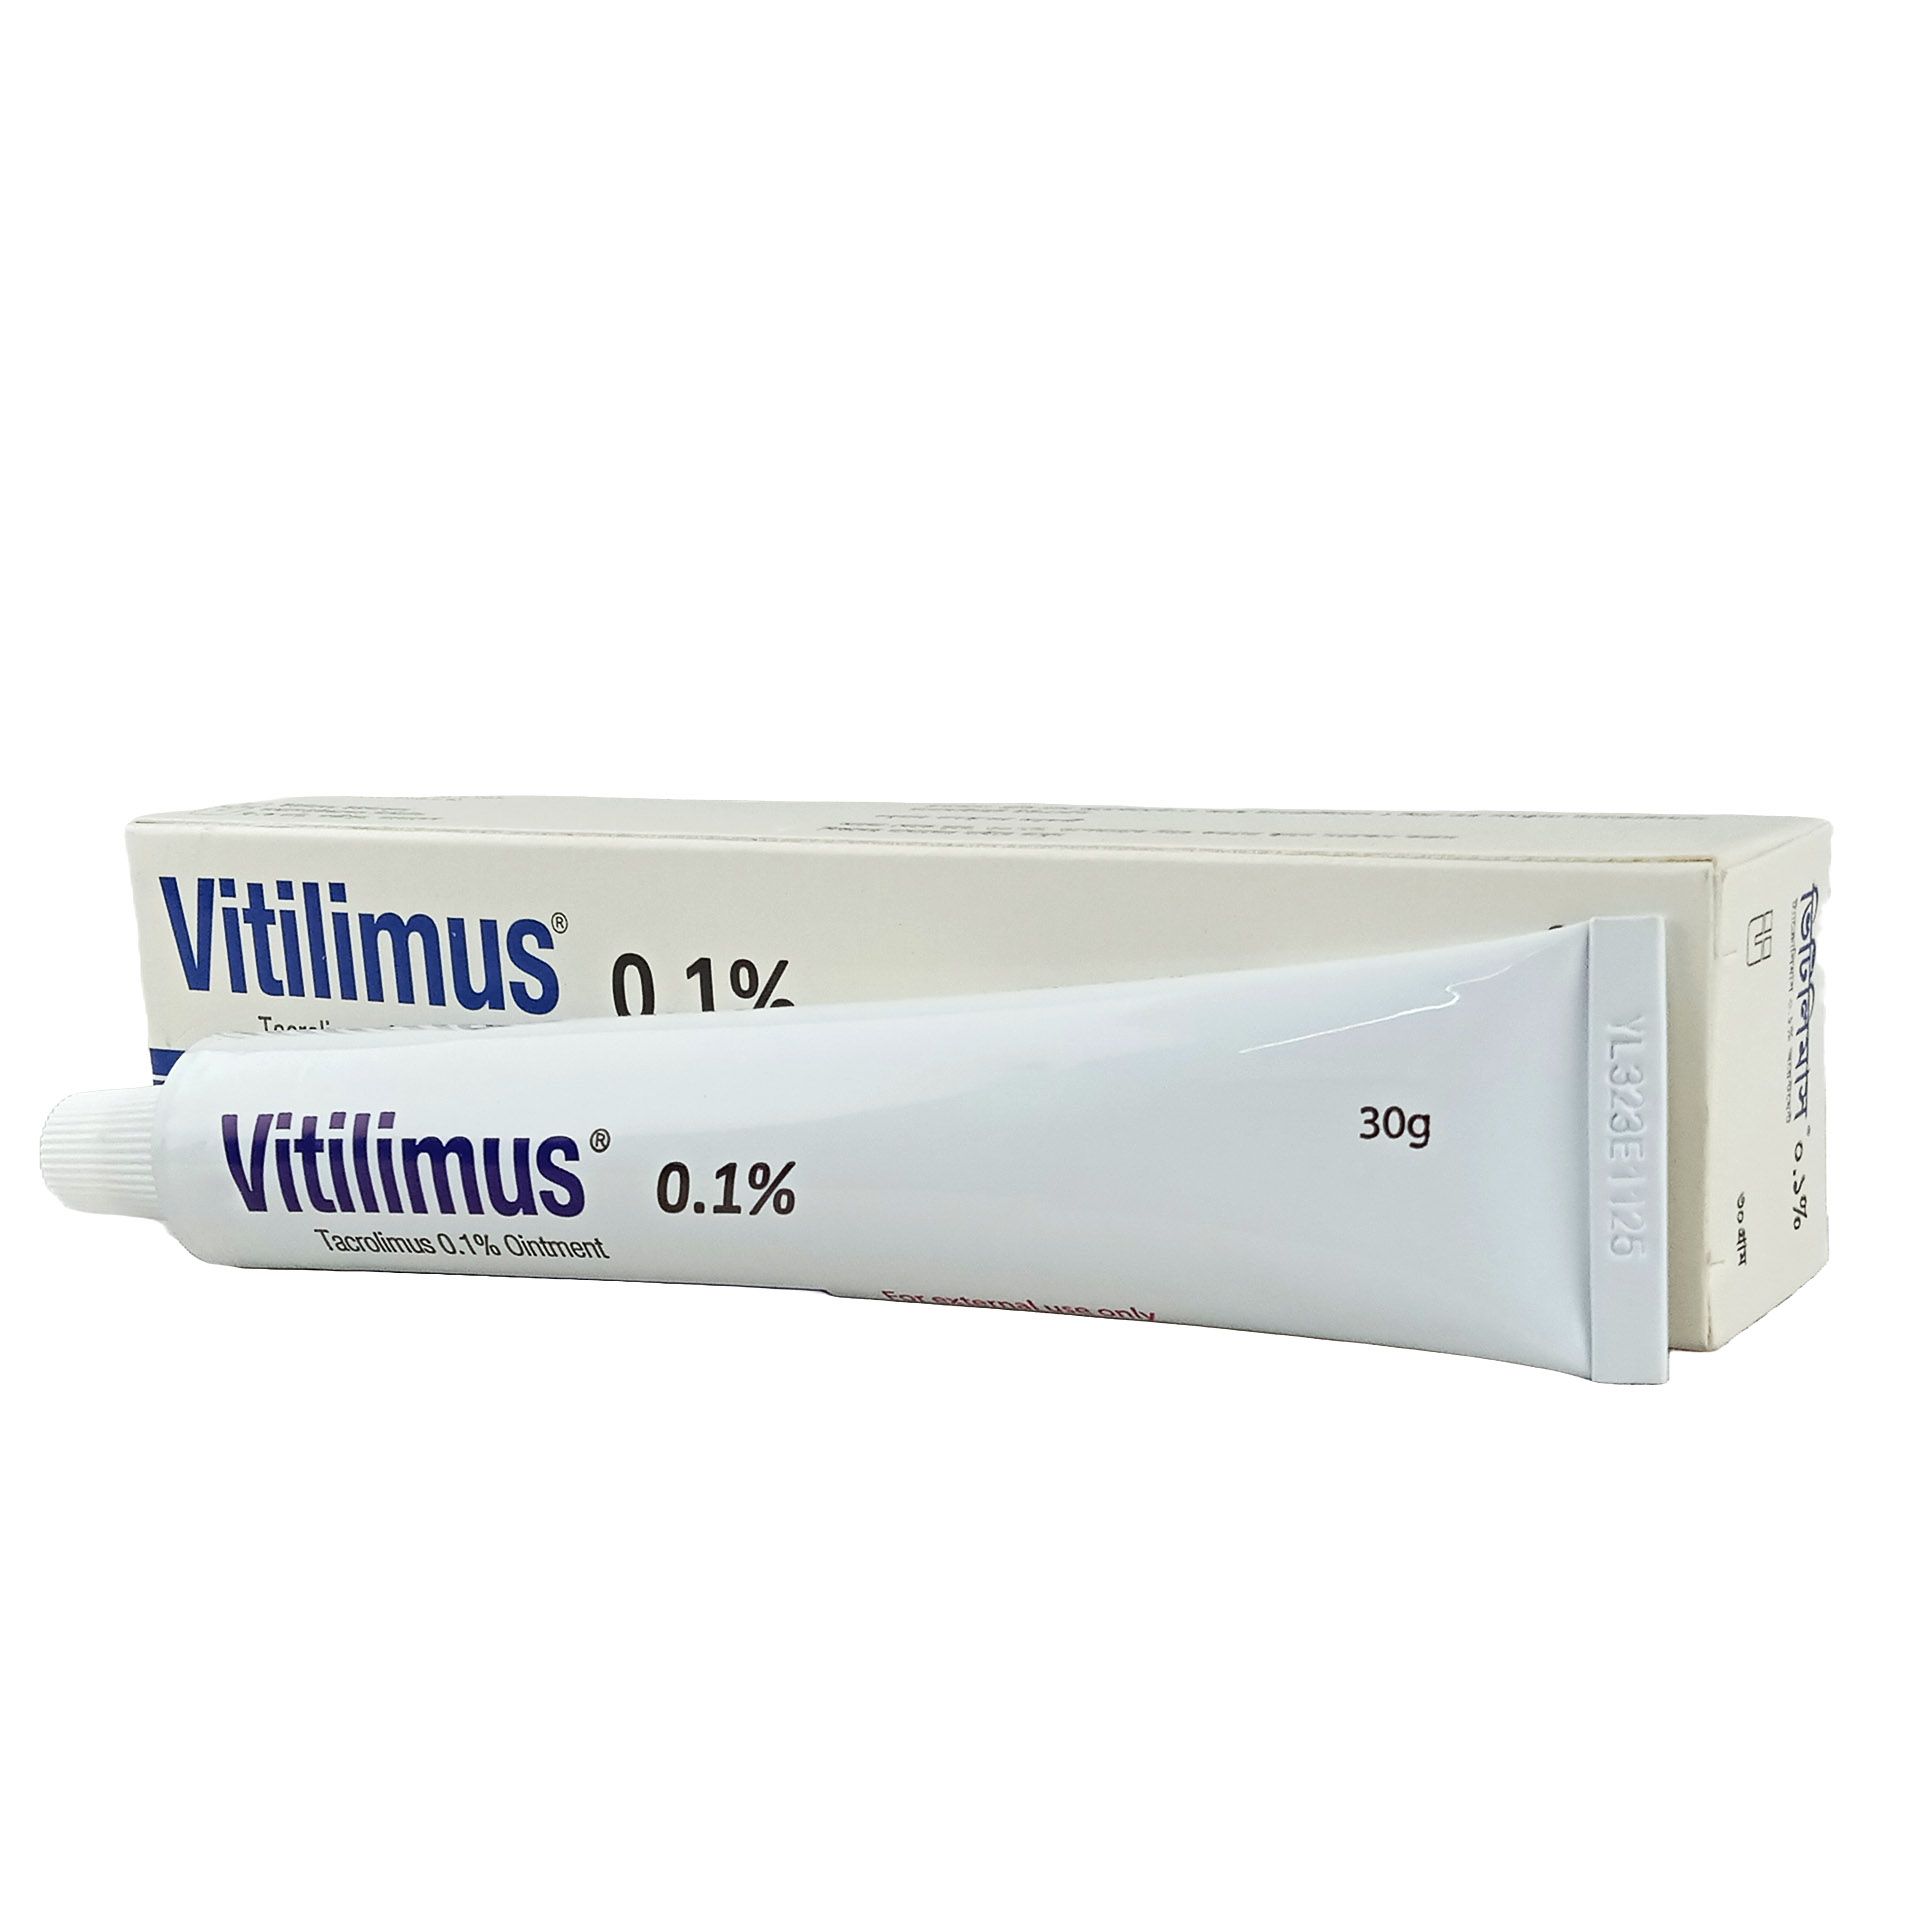 Vitilimus 0.1% Ointment